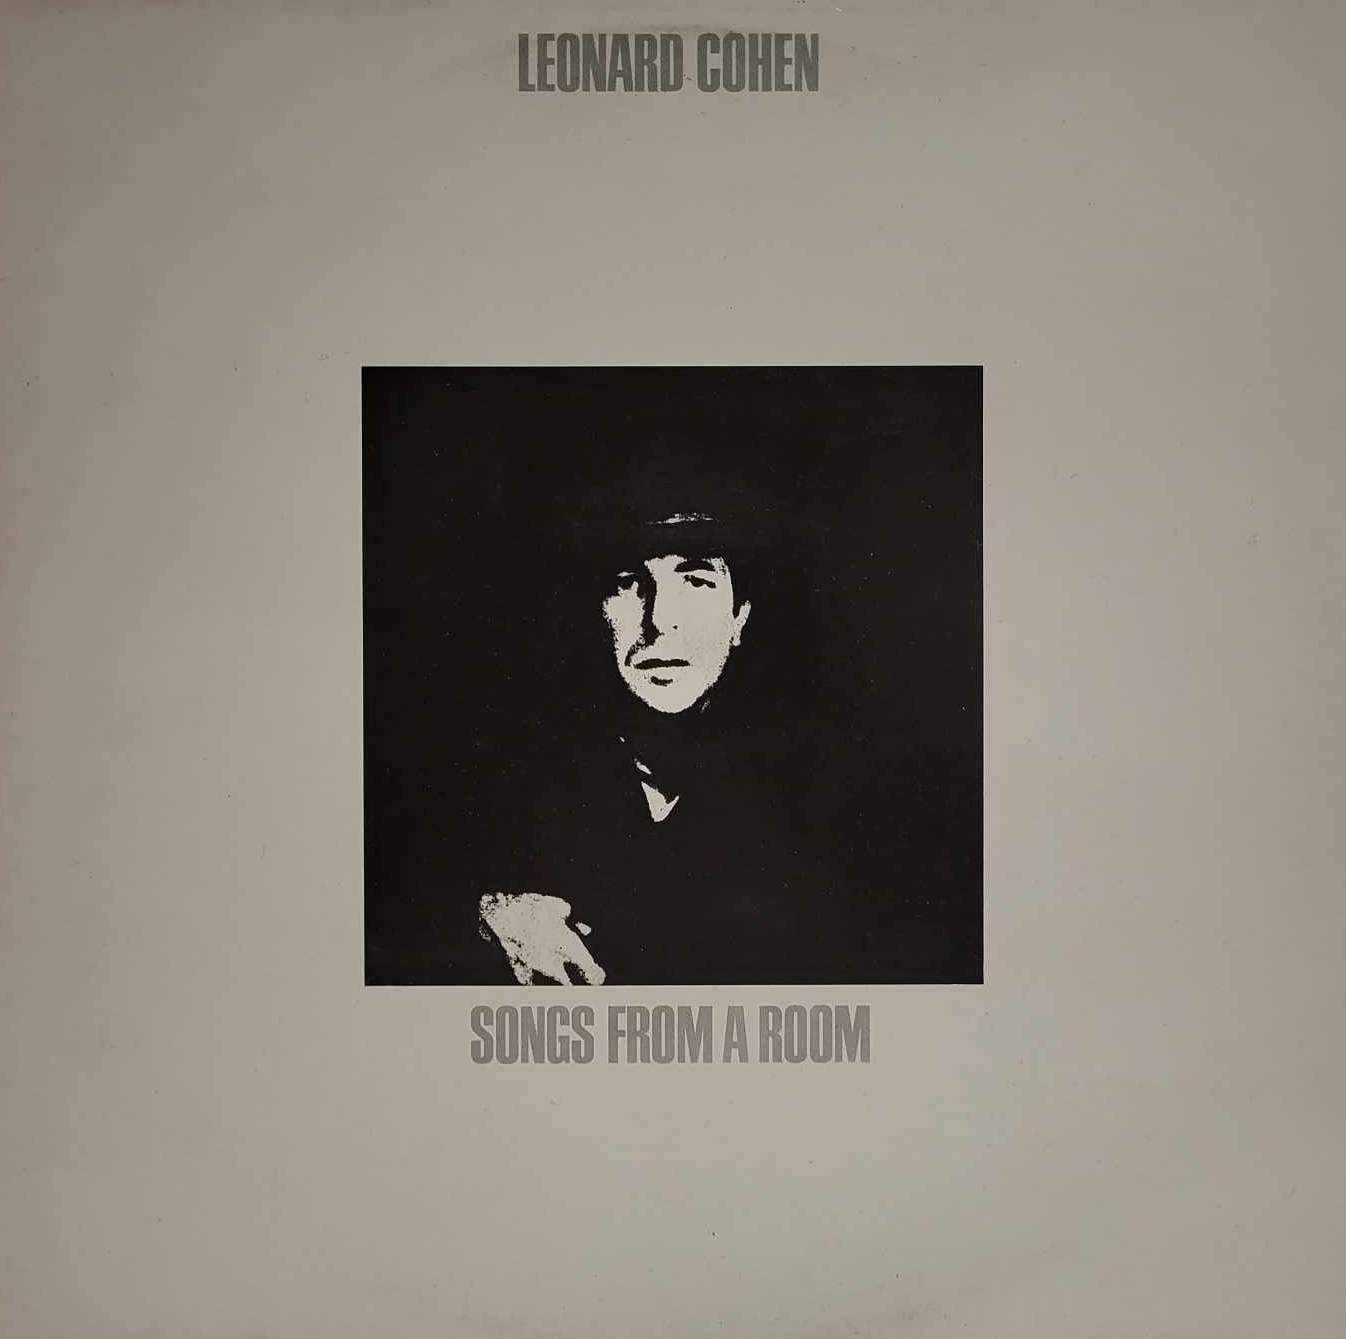 LEONARD COHEN - SONGS FROM A ROOM